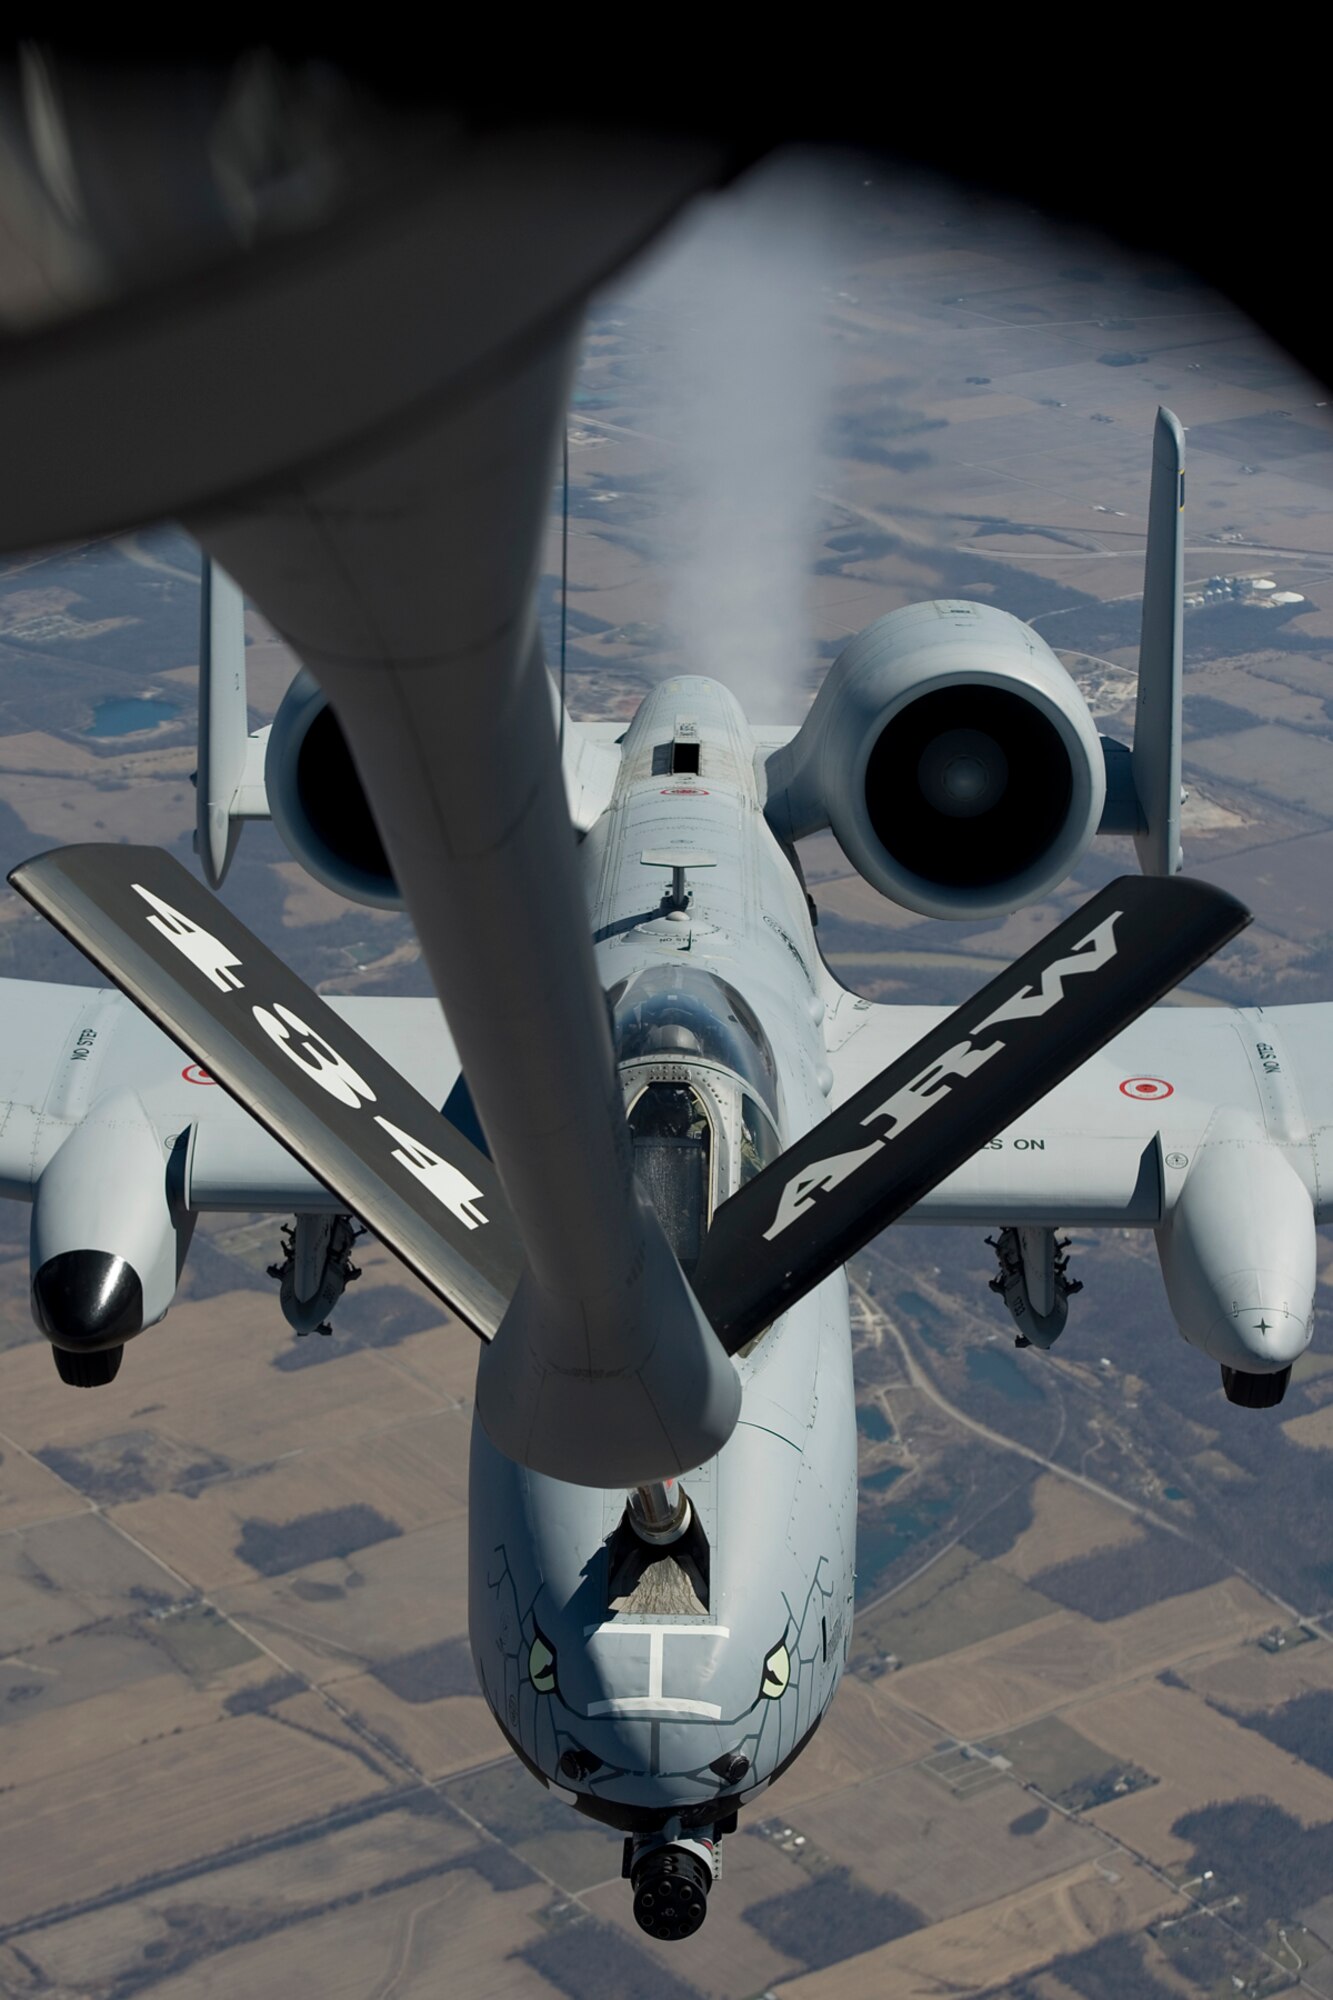 An A-10 Thunderbolt II aircraft from the Air National Guard's 122nd Fighter Wing in Fort Wayne, Ind., refuels from a KC-135R Stratotanker aircraft from the Air Force Reserve's 434th Air Refueling Wing at Grissom Air Reserve Base, Ind., during a mission over Indiana April 1, 2015. The refueling was conducted during a cadet orientation flight with University of Notre Dame Air Force ROTC Detachment 225. (U.S. Air Force photo/Tech. Sgt. Benjamin Mota)